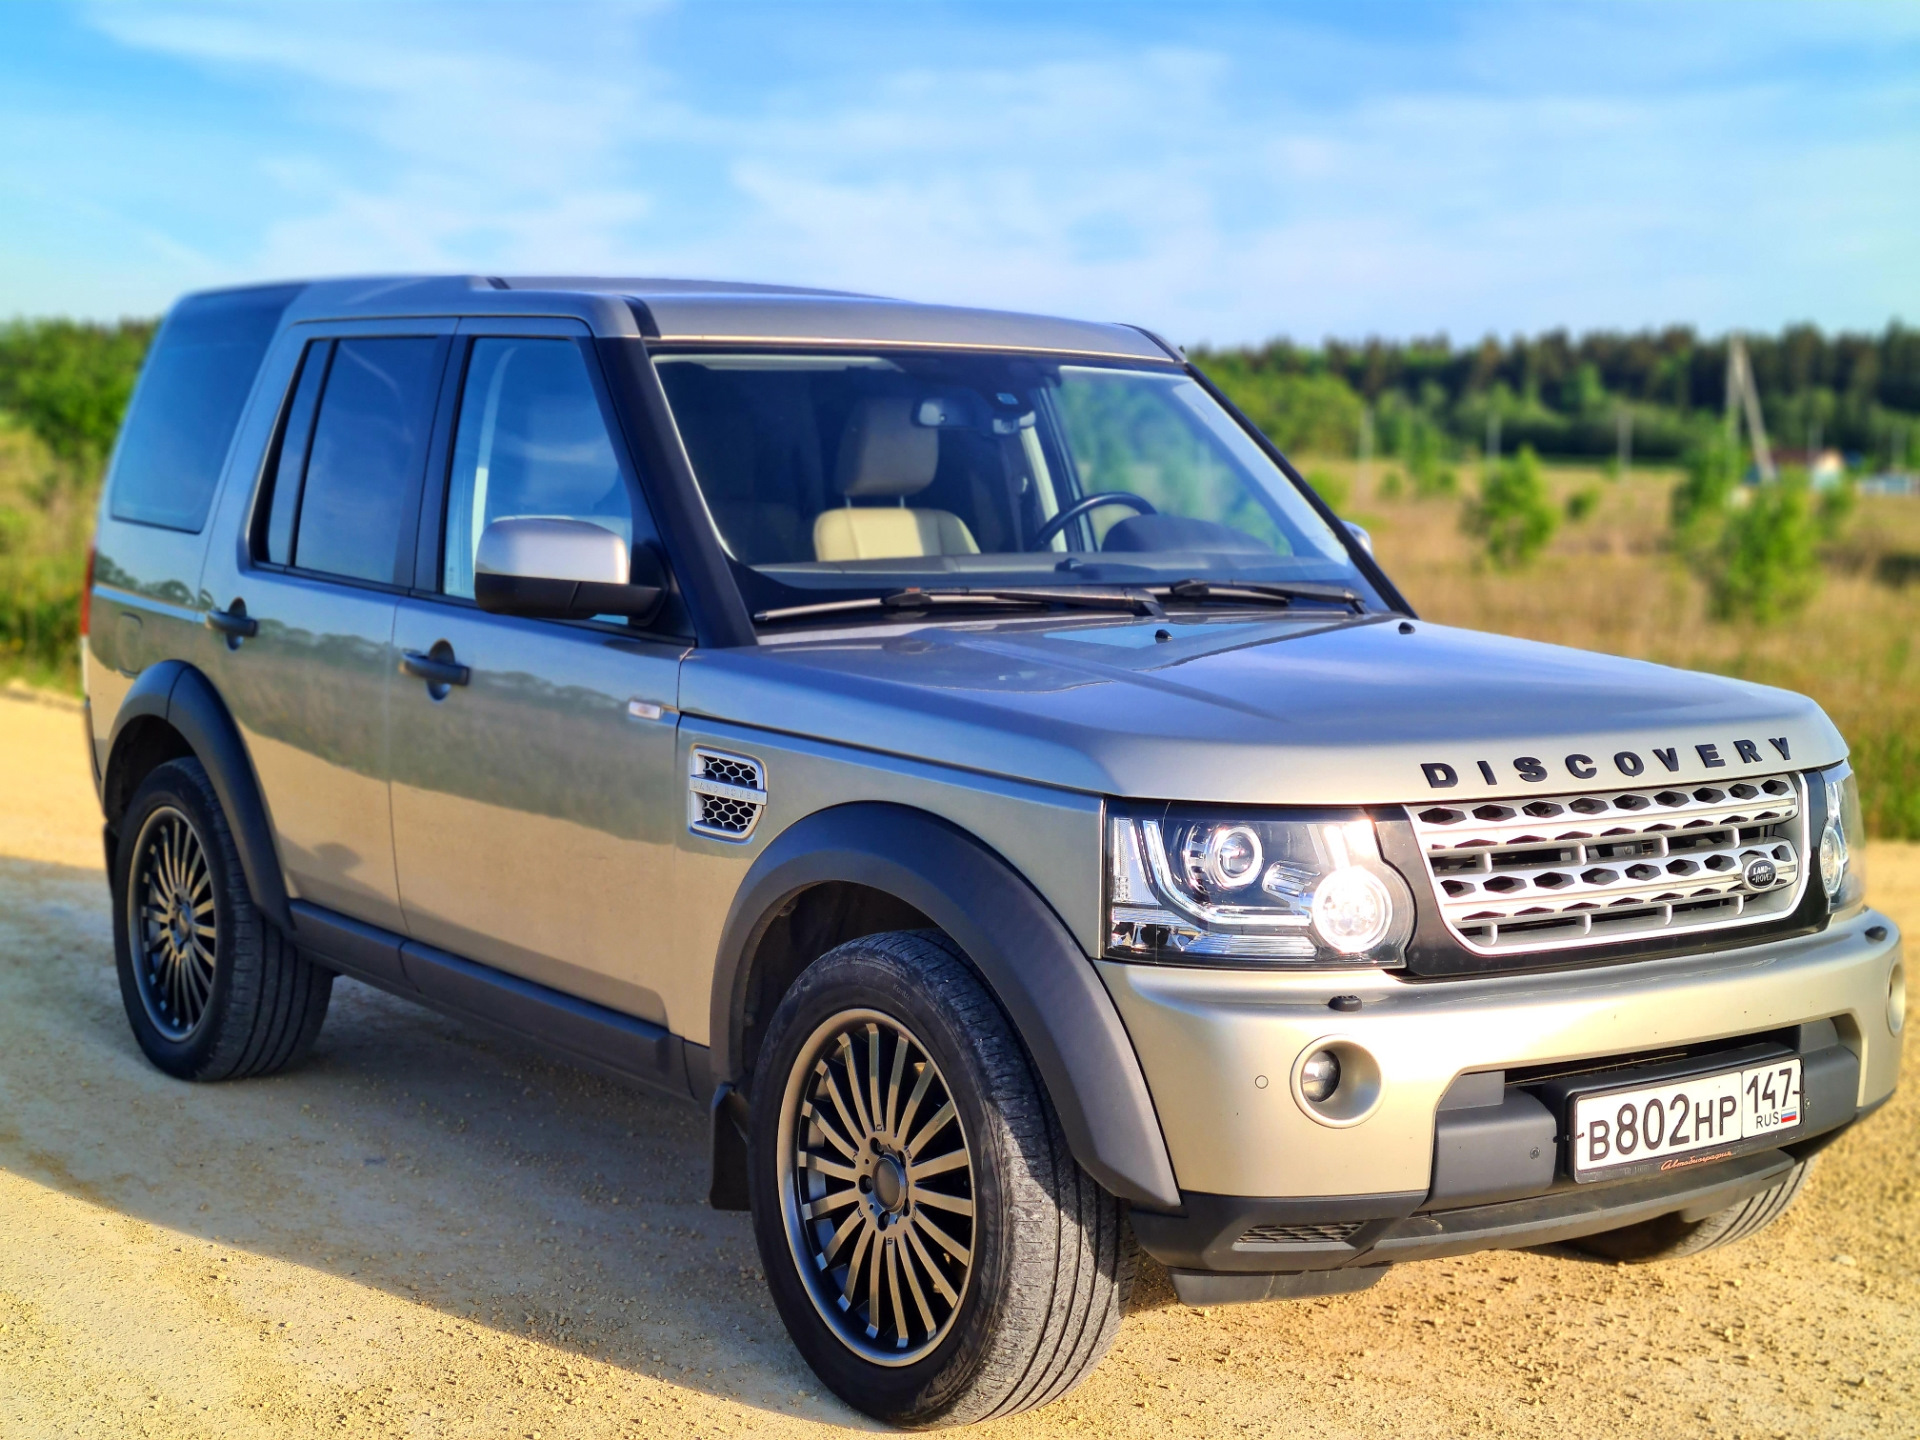 Дискавери б. Land Rover Discovery 4. Land Rover Discovery 2. Land Rover Discovery 3. Land Rover Discovery 4 2016.